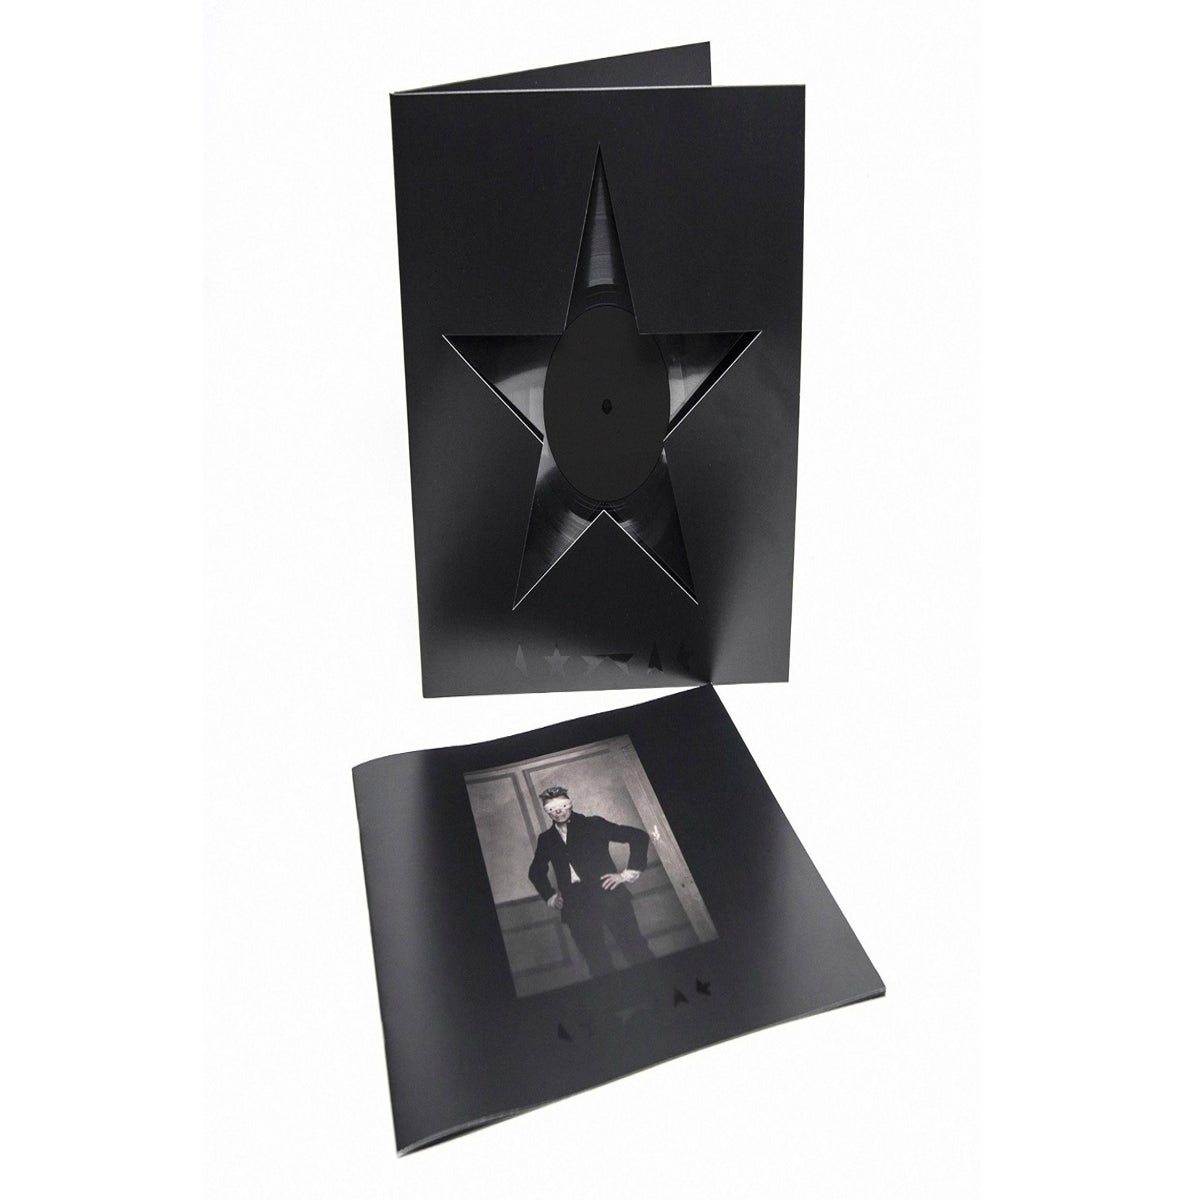 David Bowie hid a beautiful secret in the Blackstar vinyl that comes out when it's left in the sun | The Independent | The